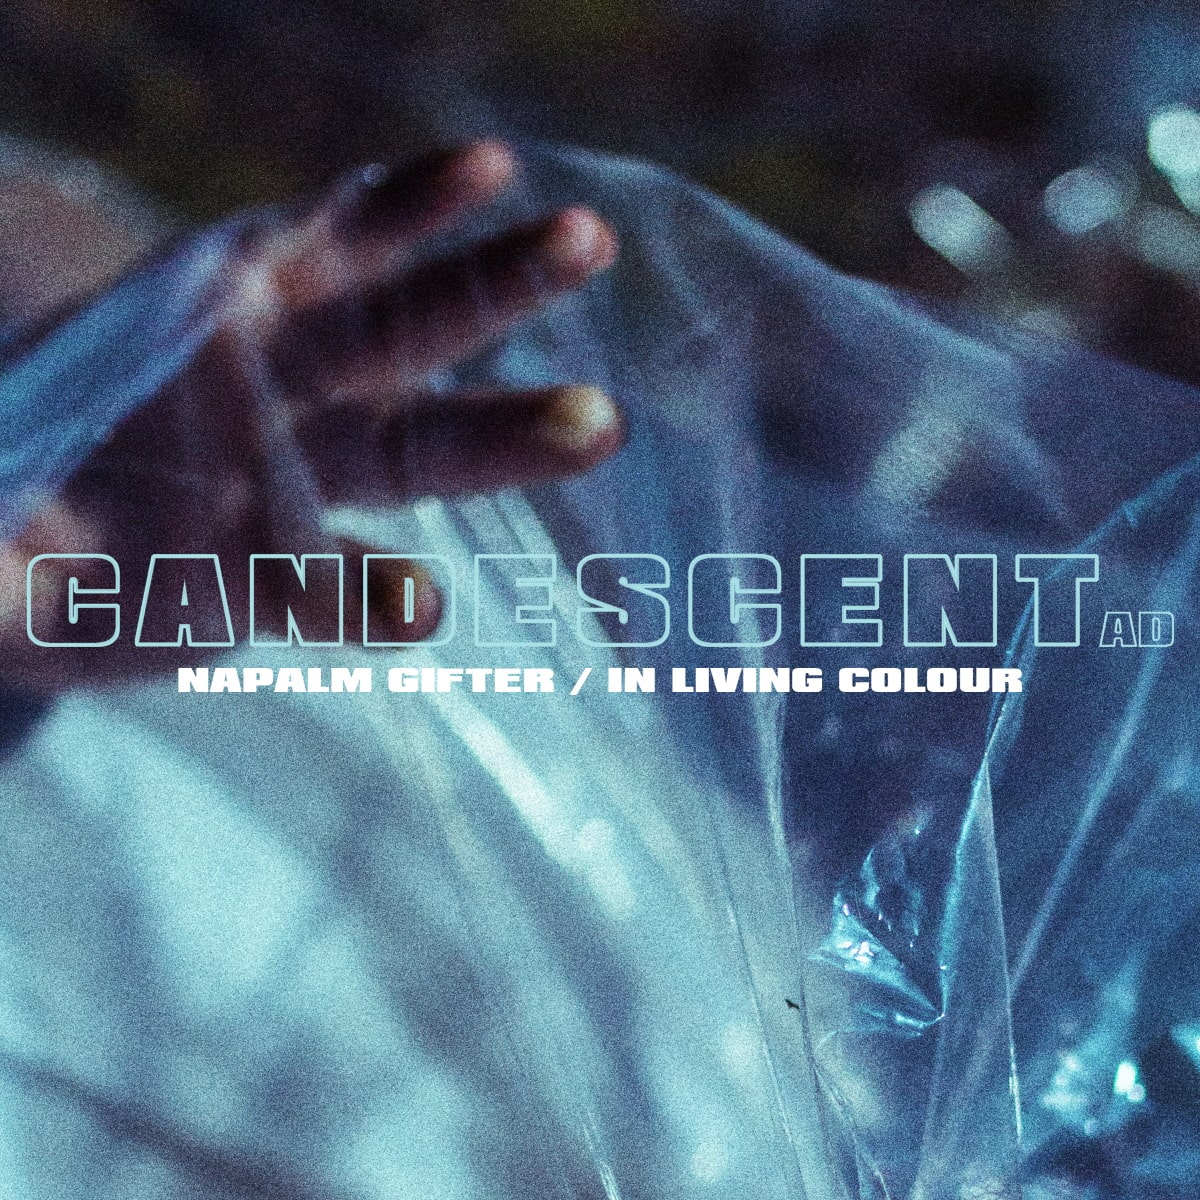 Candescent AD art by by Dev Place Photos - @devplacephotos